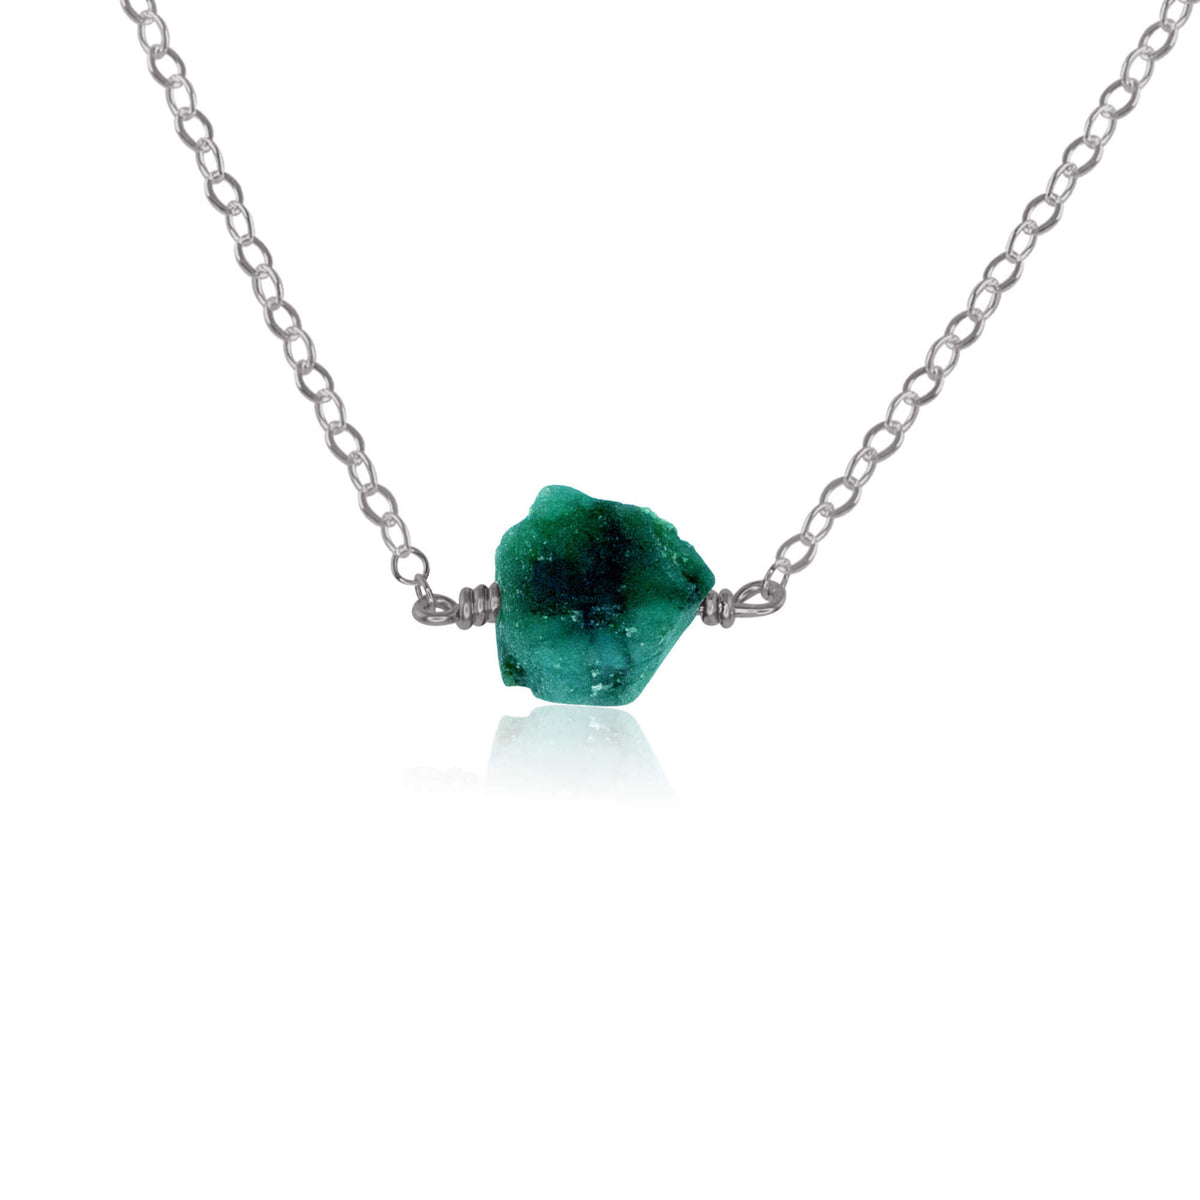 Raw Nugget Necklace - Emerald - Stainless Steel - Luna Tide Handmade Jewellery